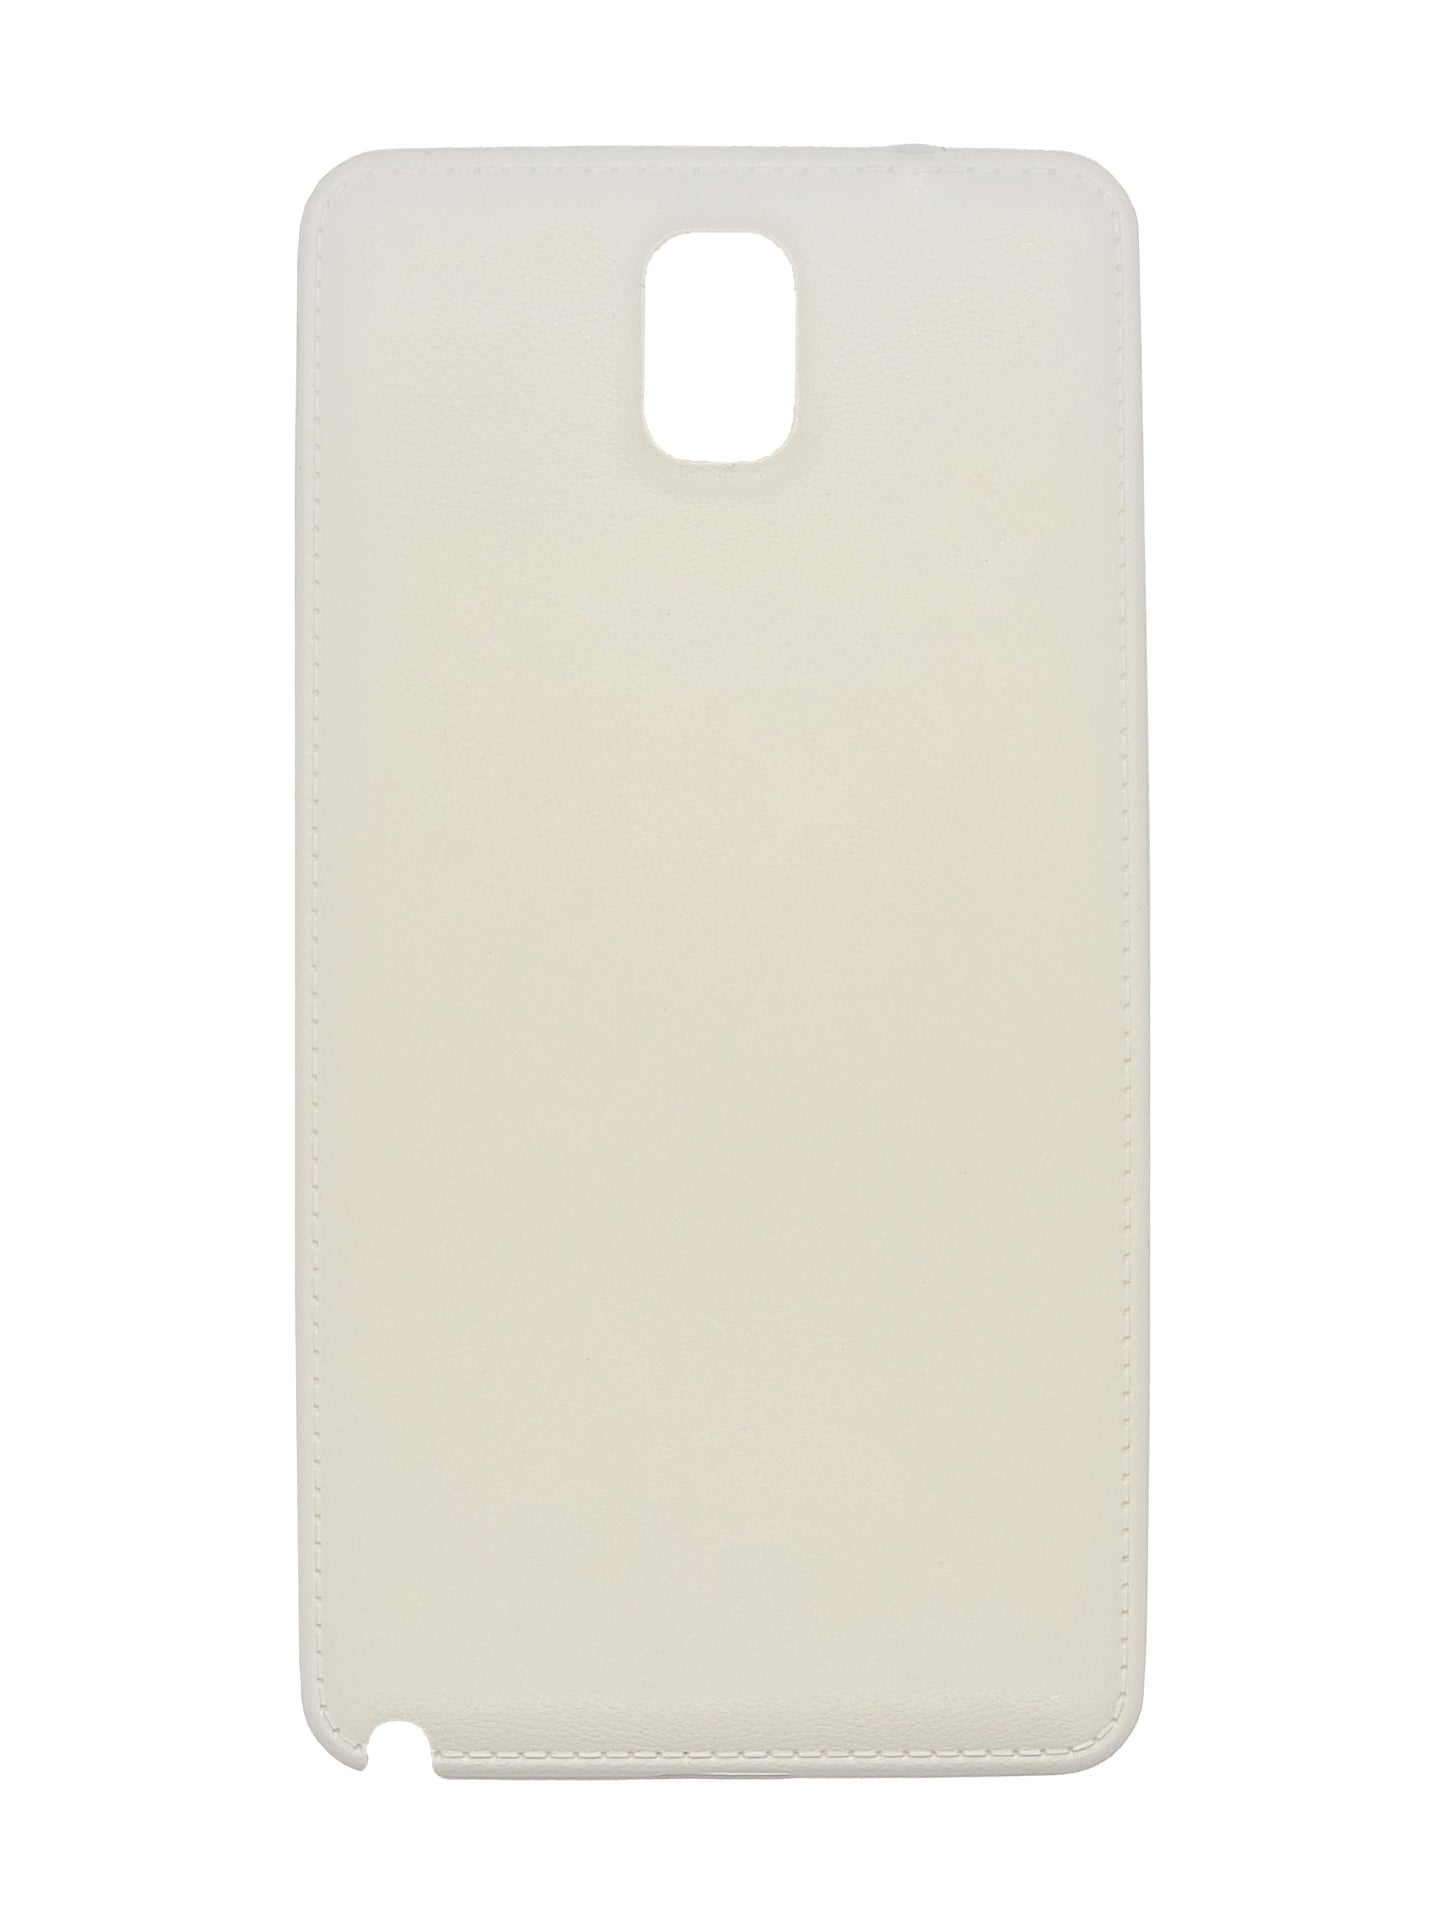 SGN Note 3 Back Cover (White)